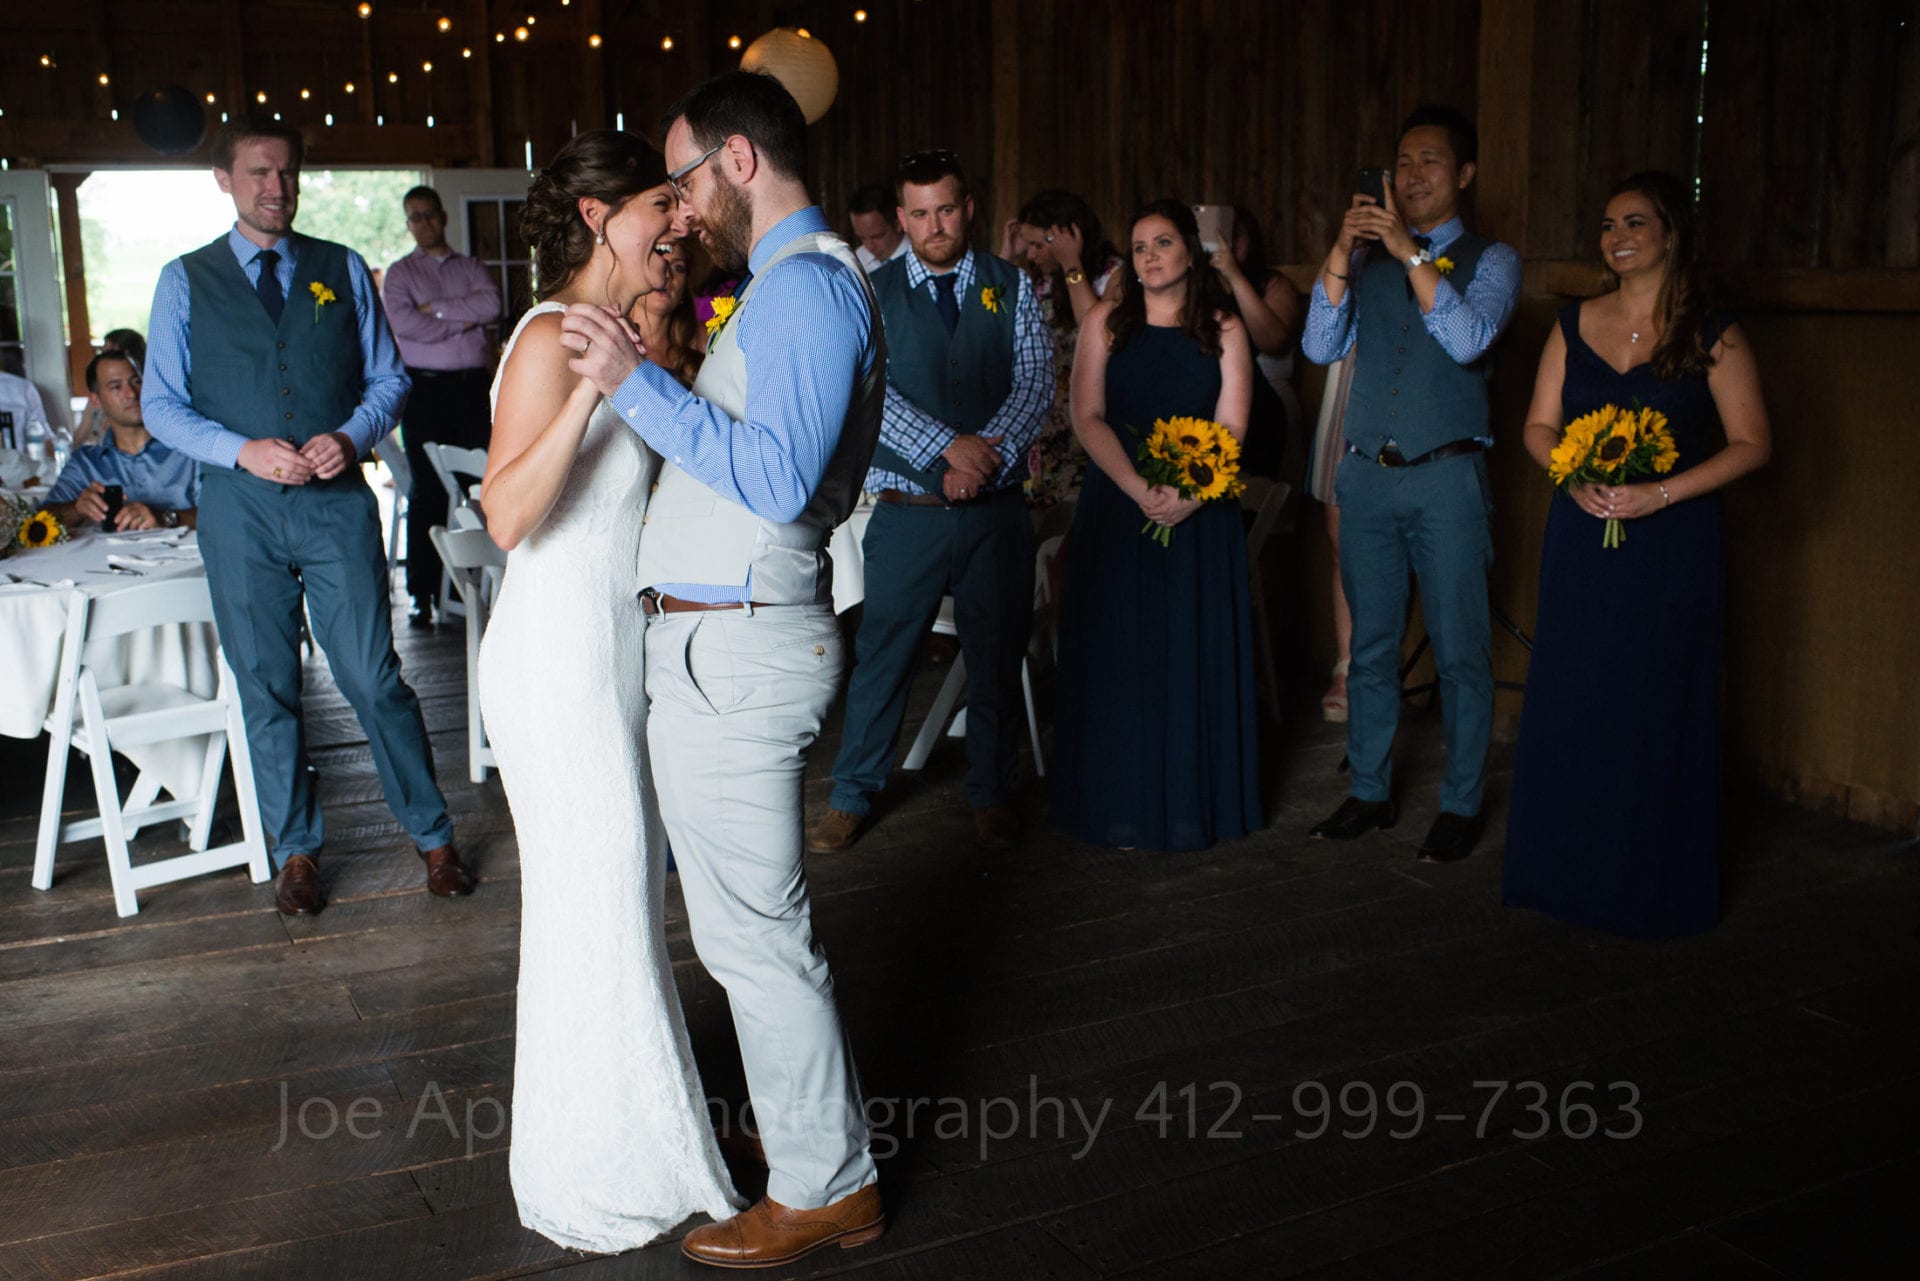 Bride wearing white and groom wearing a tan vest and blue shirt dance close together while their guests surround them.